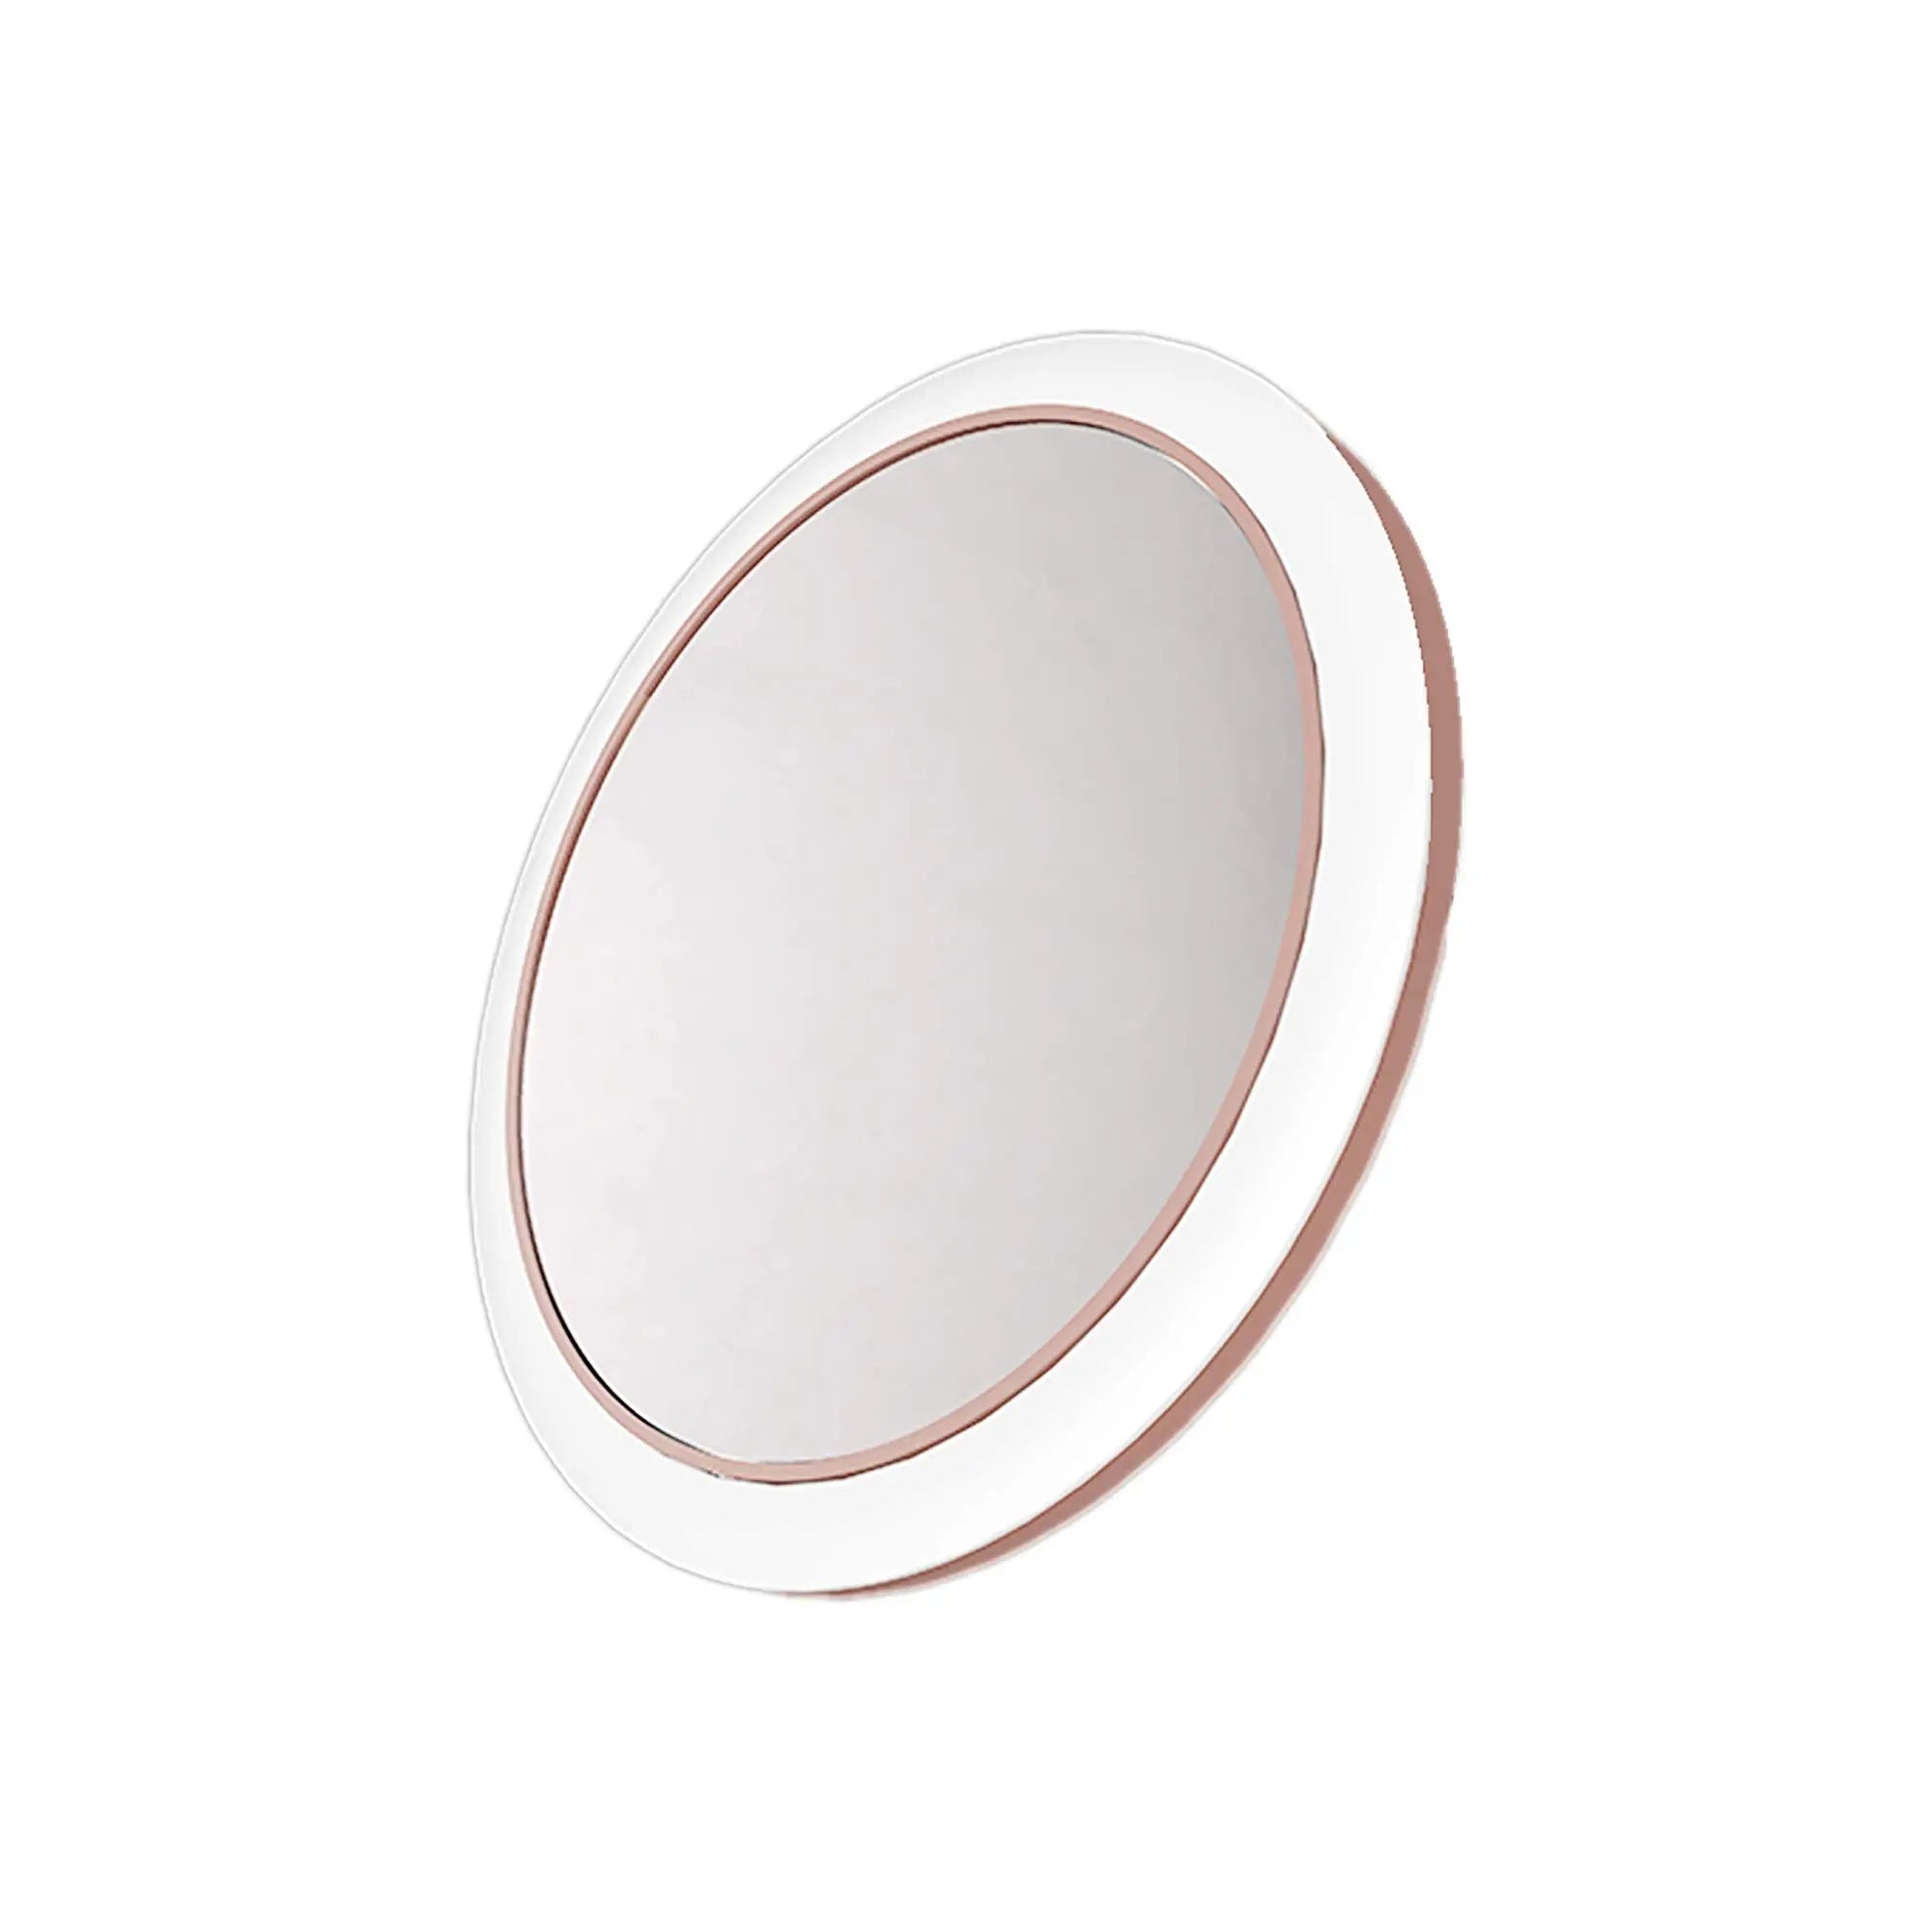 Portable Lighted Makeup Mirror with Wireless Charging Rose Gold Color Mirrex Inc.